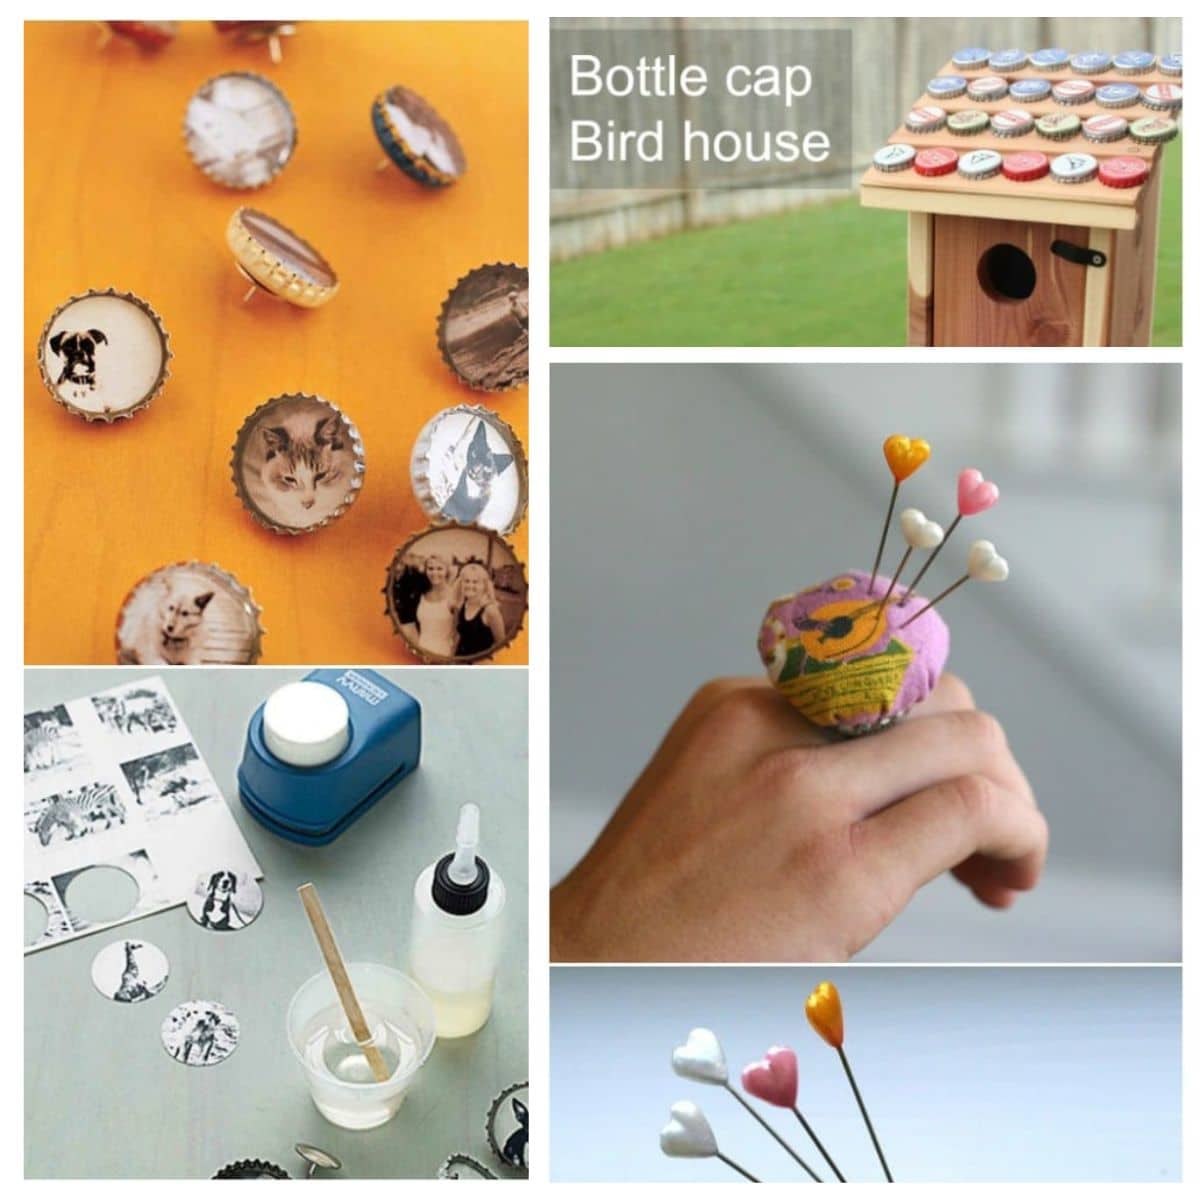 25 Bottle Cap Upcycling Projects That Add Flair To Your Home - DIY